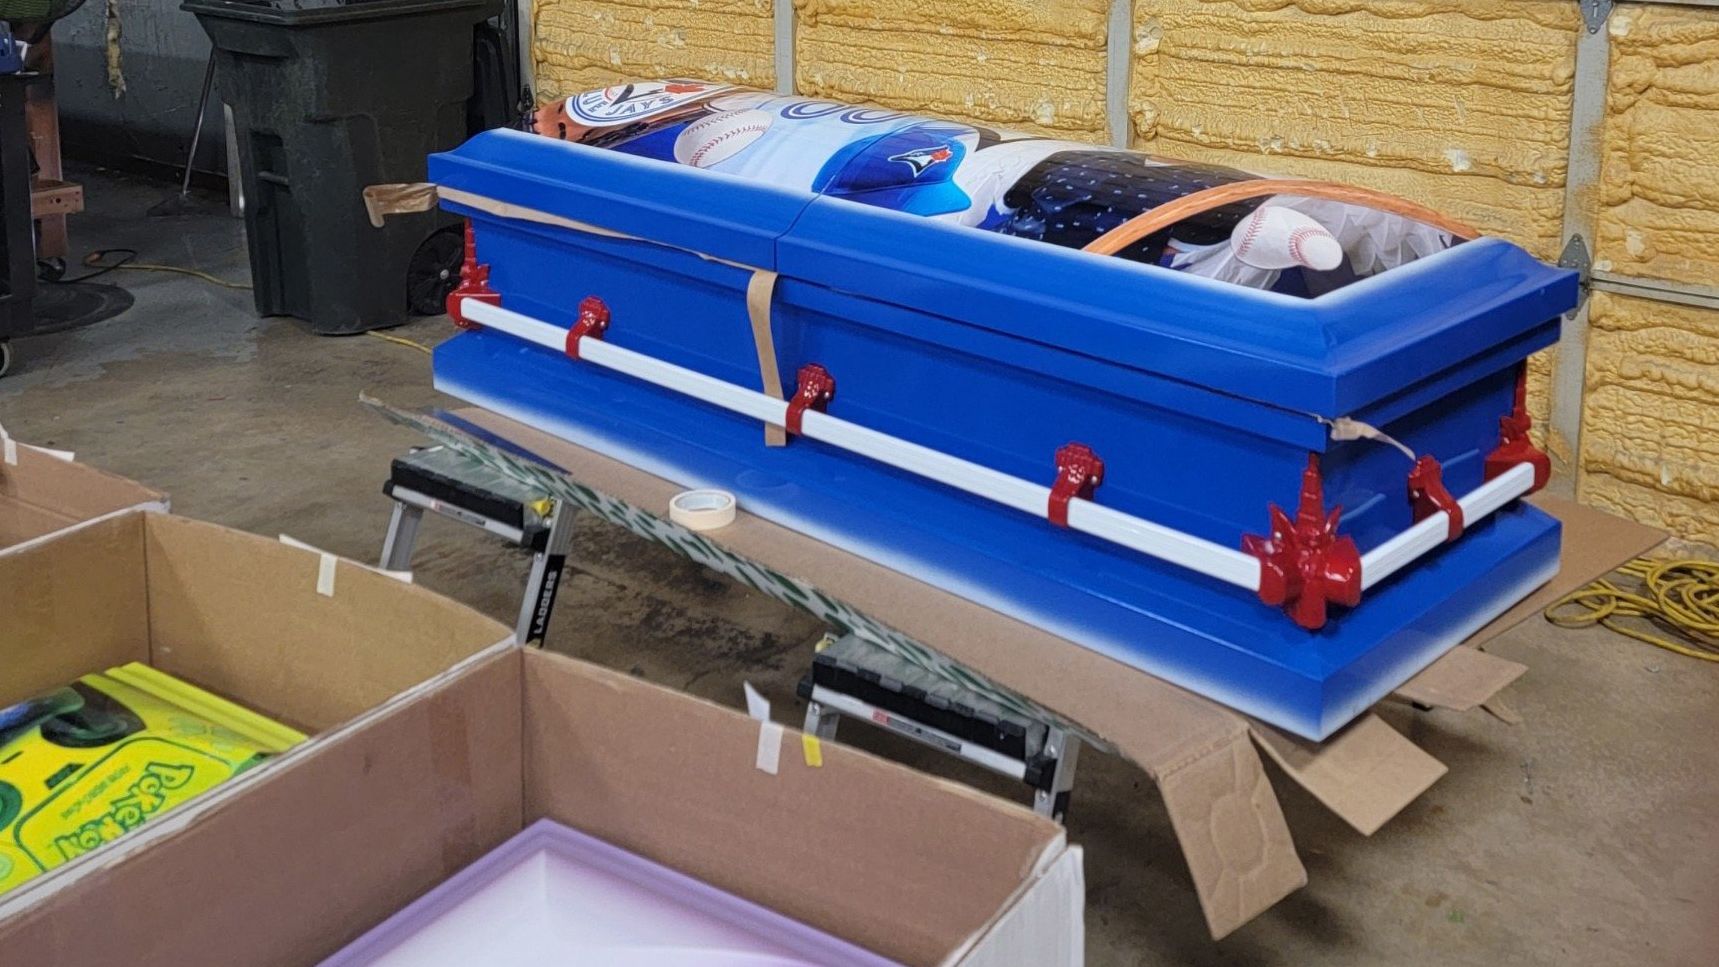 SoulShine Industries is donating custom caskets for 19 victims of the Uvalde school shooting.